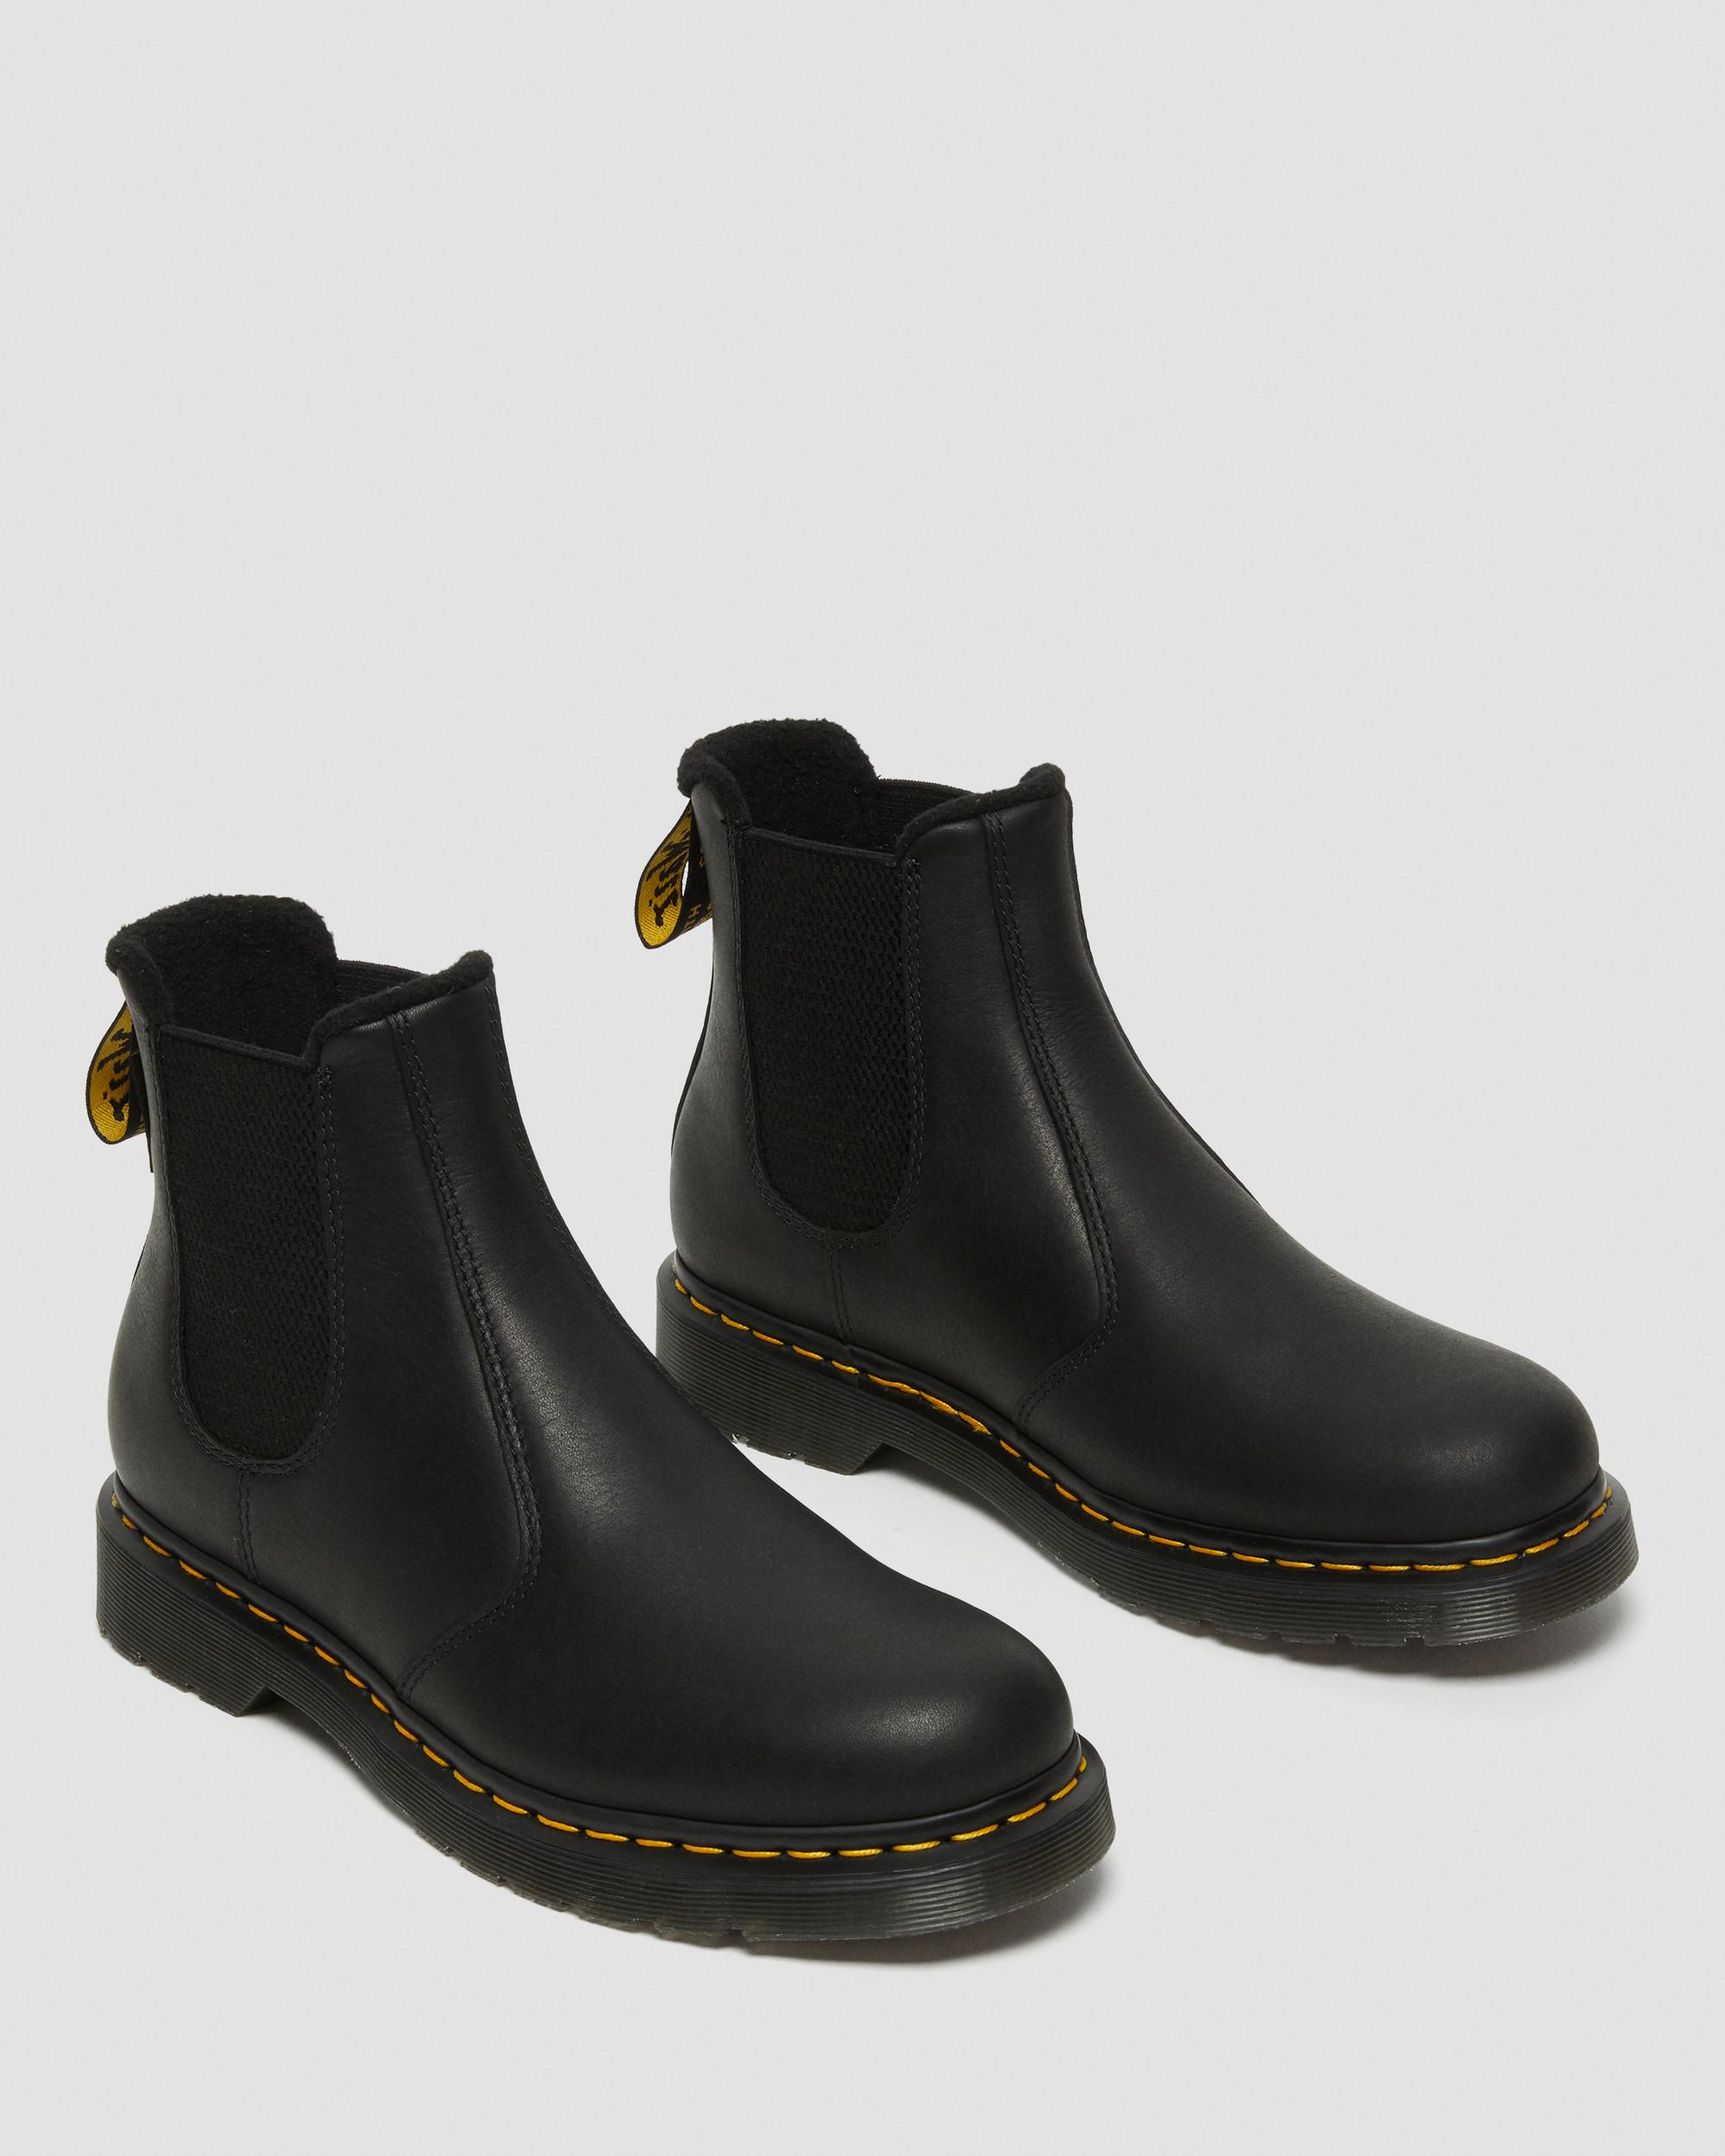 2976 Warmwair Valor Wp Leather Chelsea Boots in Black